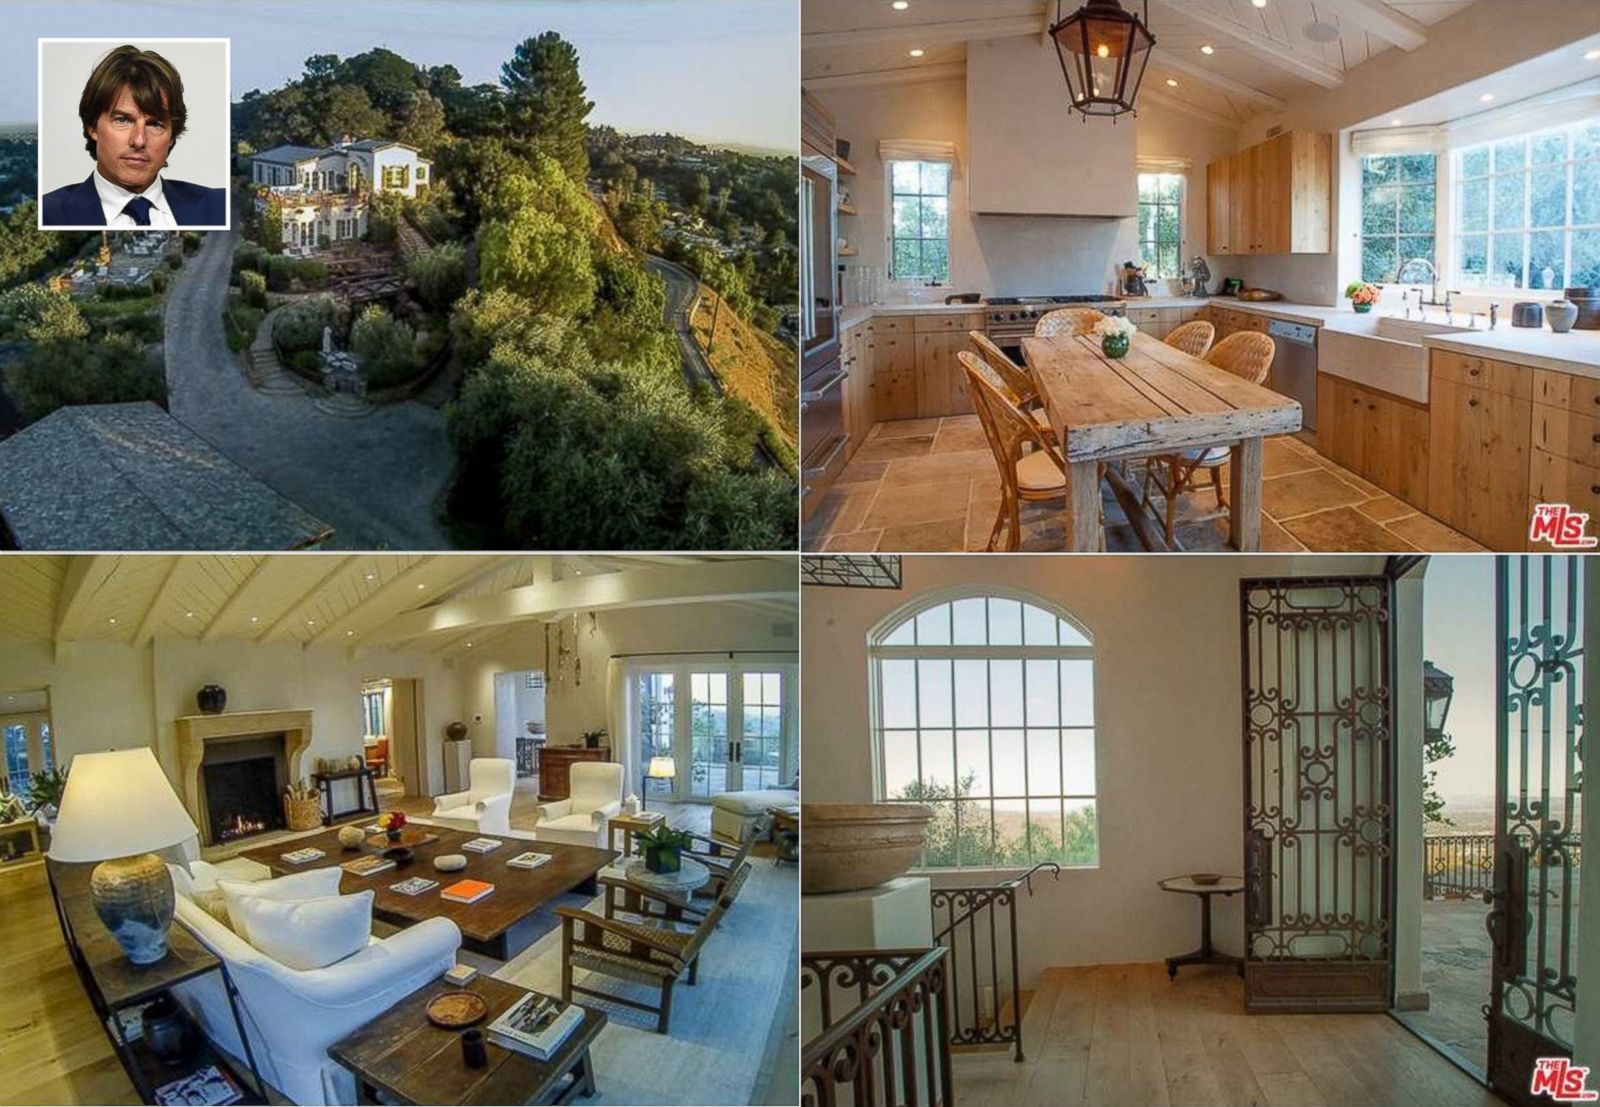 Tom Cruise Sells Home for $11.4 Million Picture | In Photos: Celebrity ...